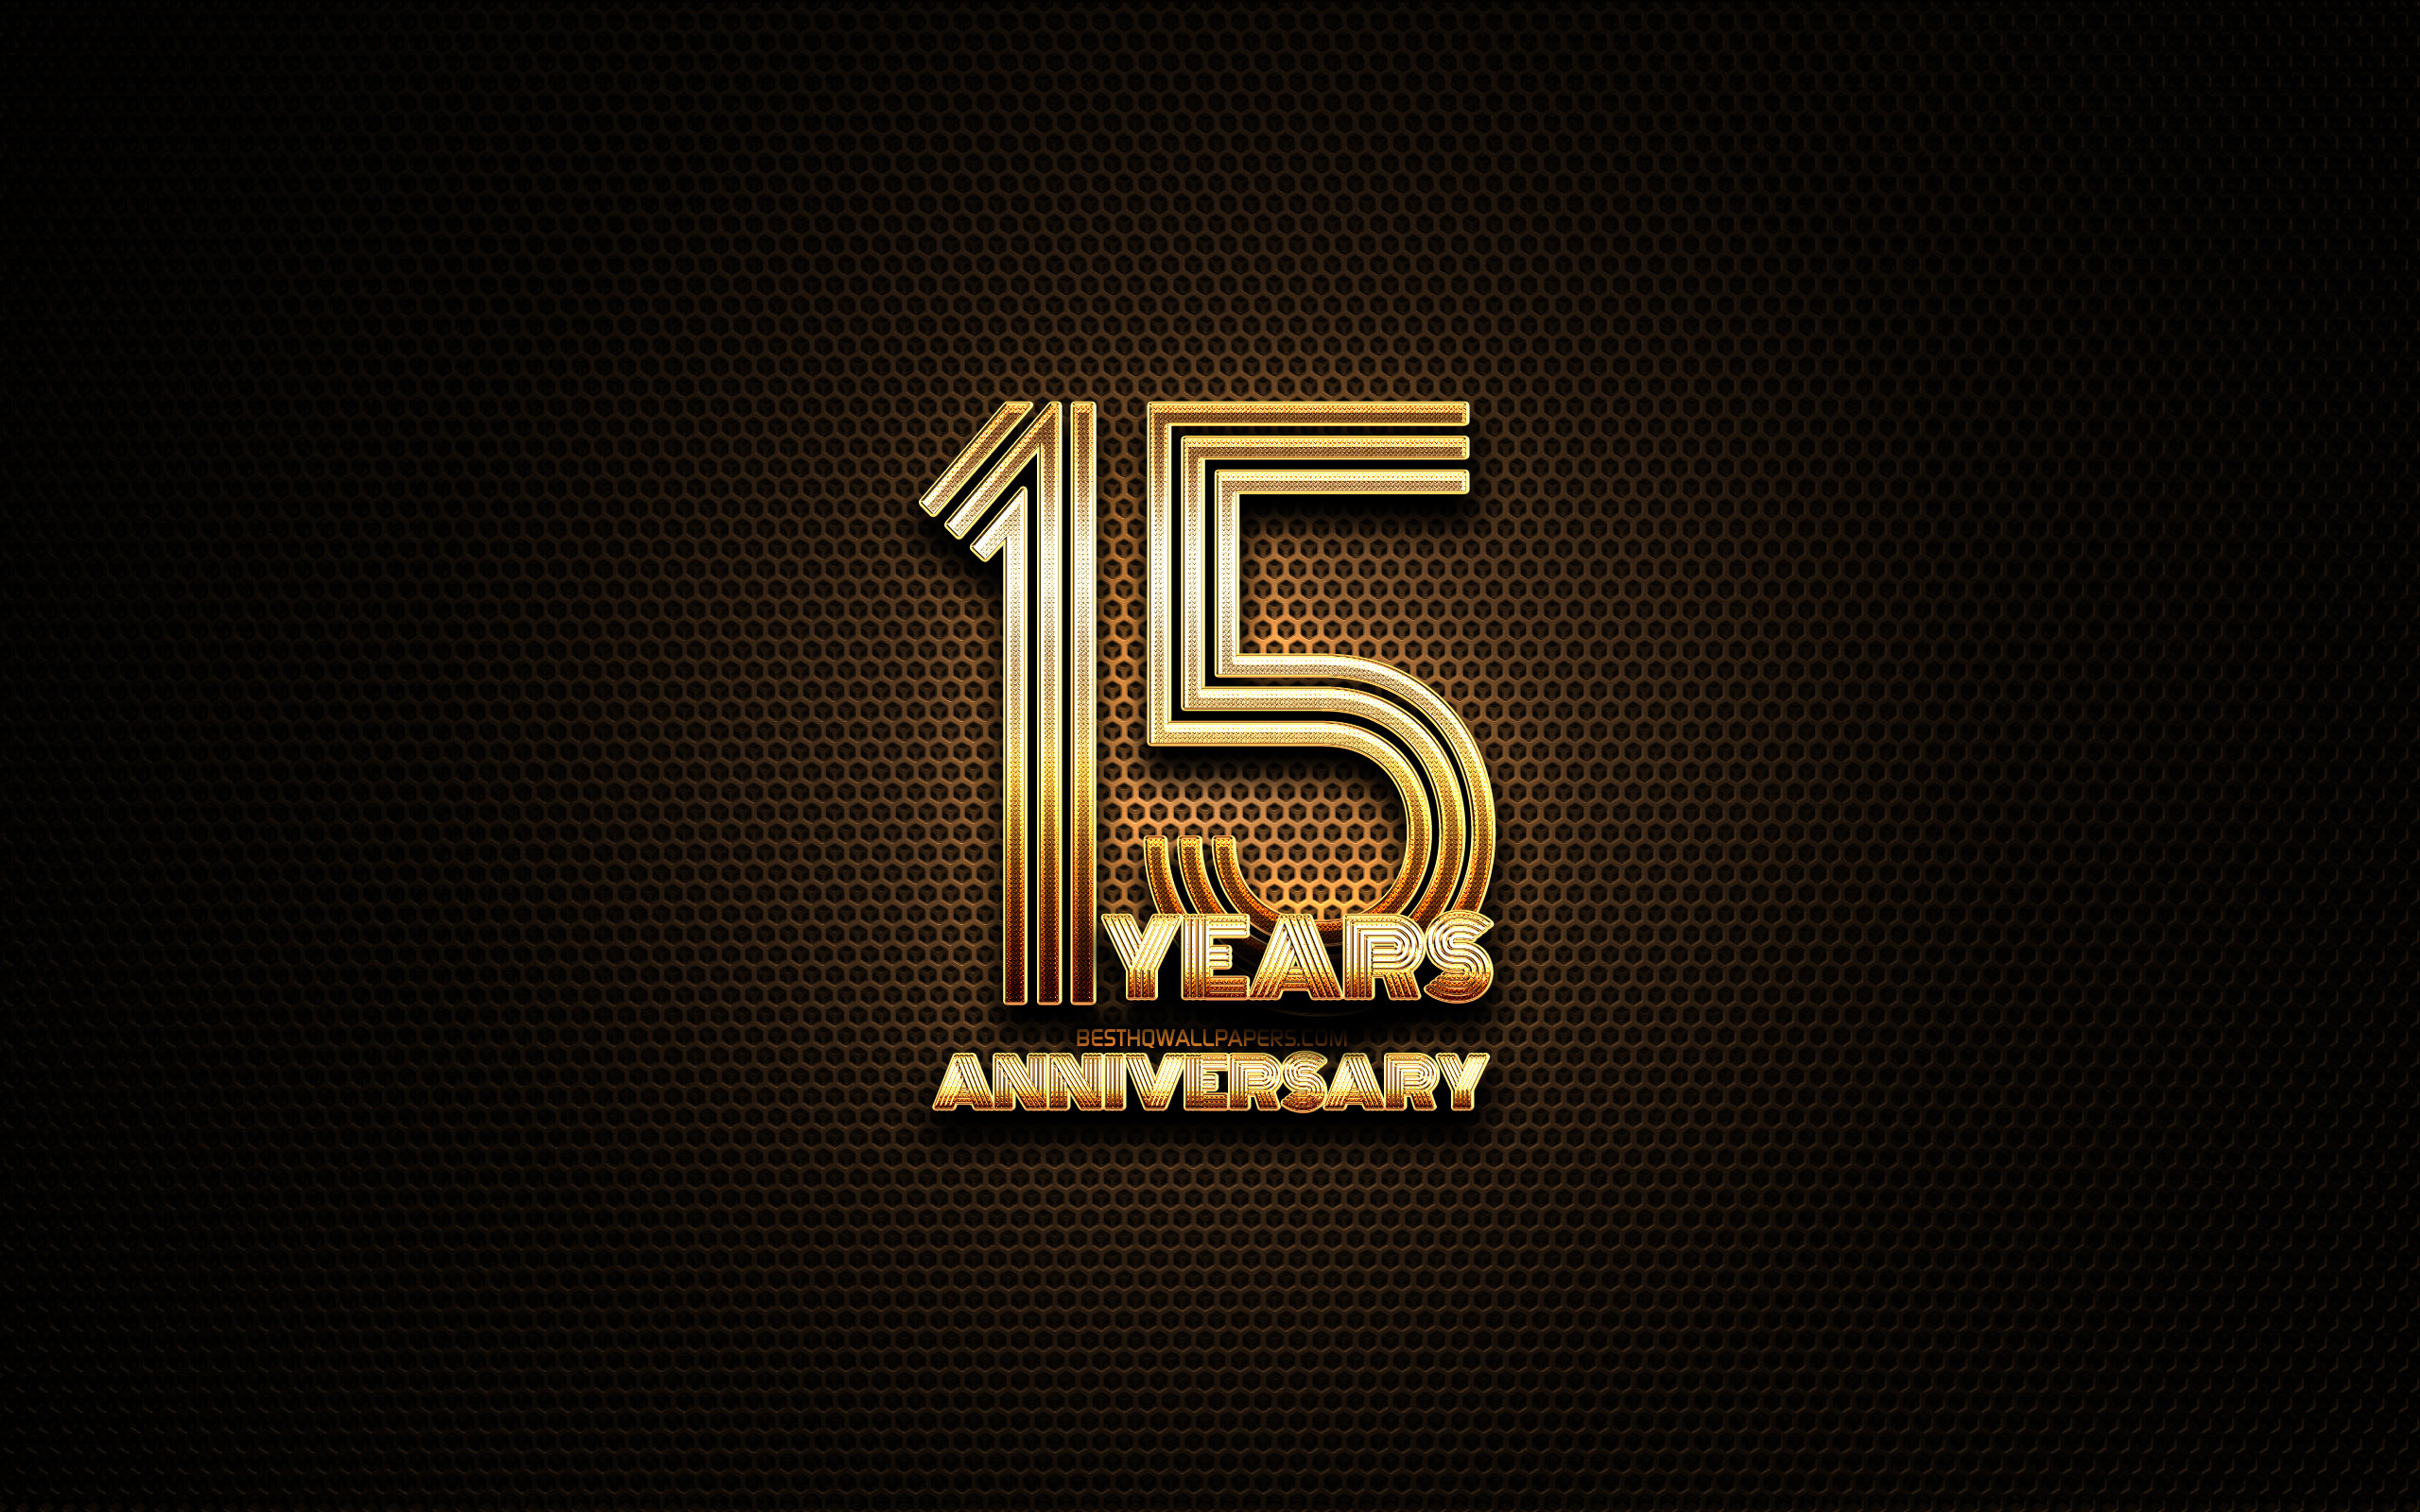 Download wallpaper 15th anniversary, glitter signs, anniversary concepts, grid metal background, 15 Years Anniversary, creative, Golden 15th anniversary sign for desktop with resolution 2560x1600. High Quality HD picture wallpaper